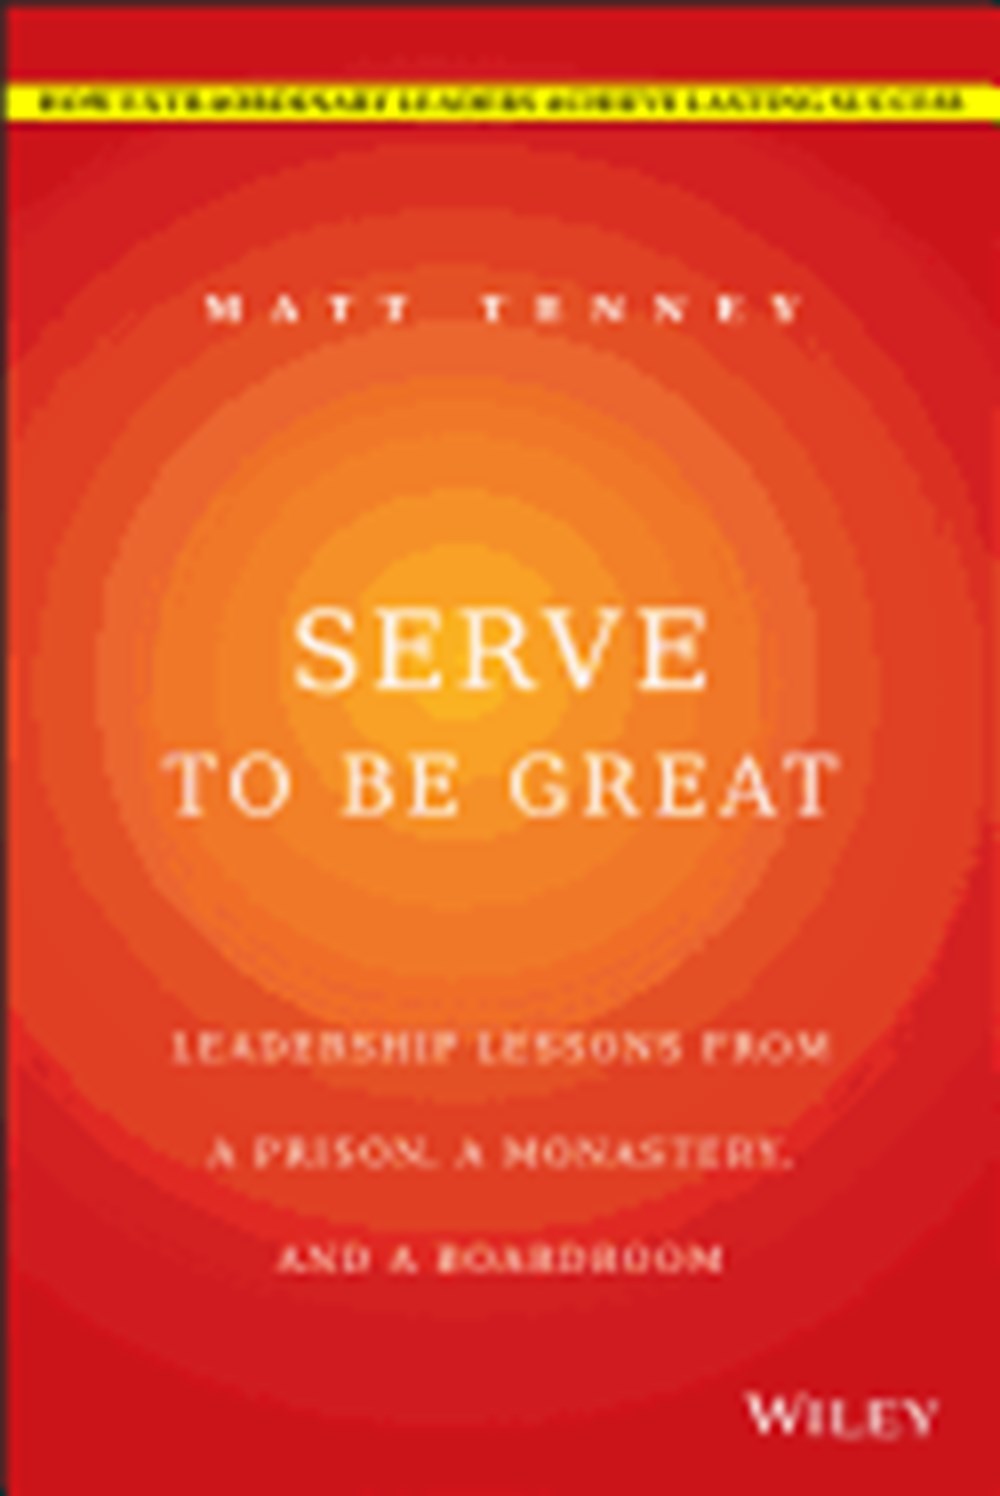 Serve to Be Great Leadership Lessons from a Prison, a Monastery, and a Boardroom